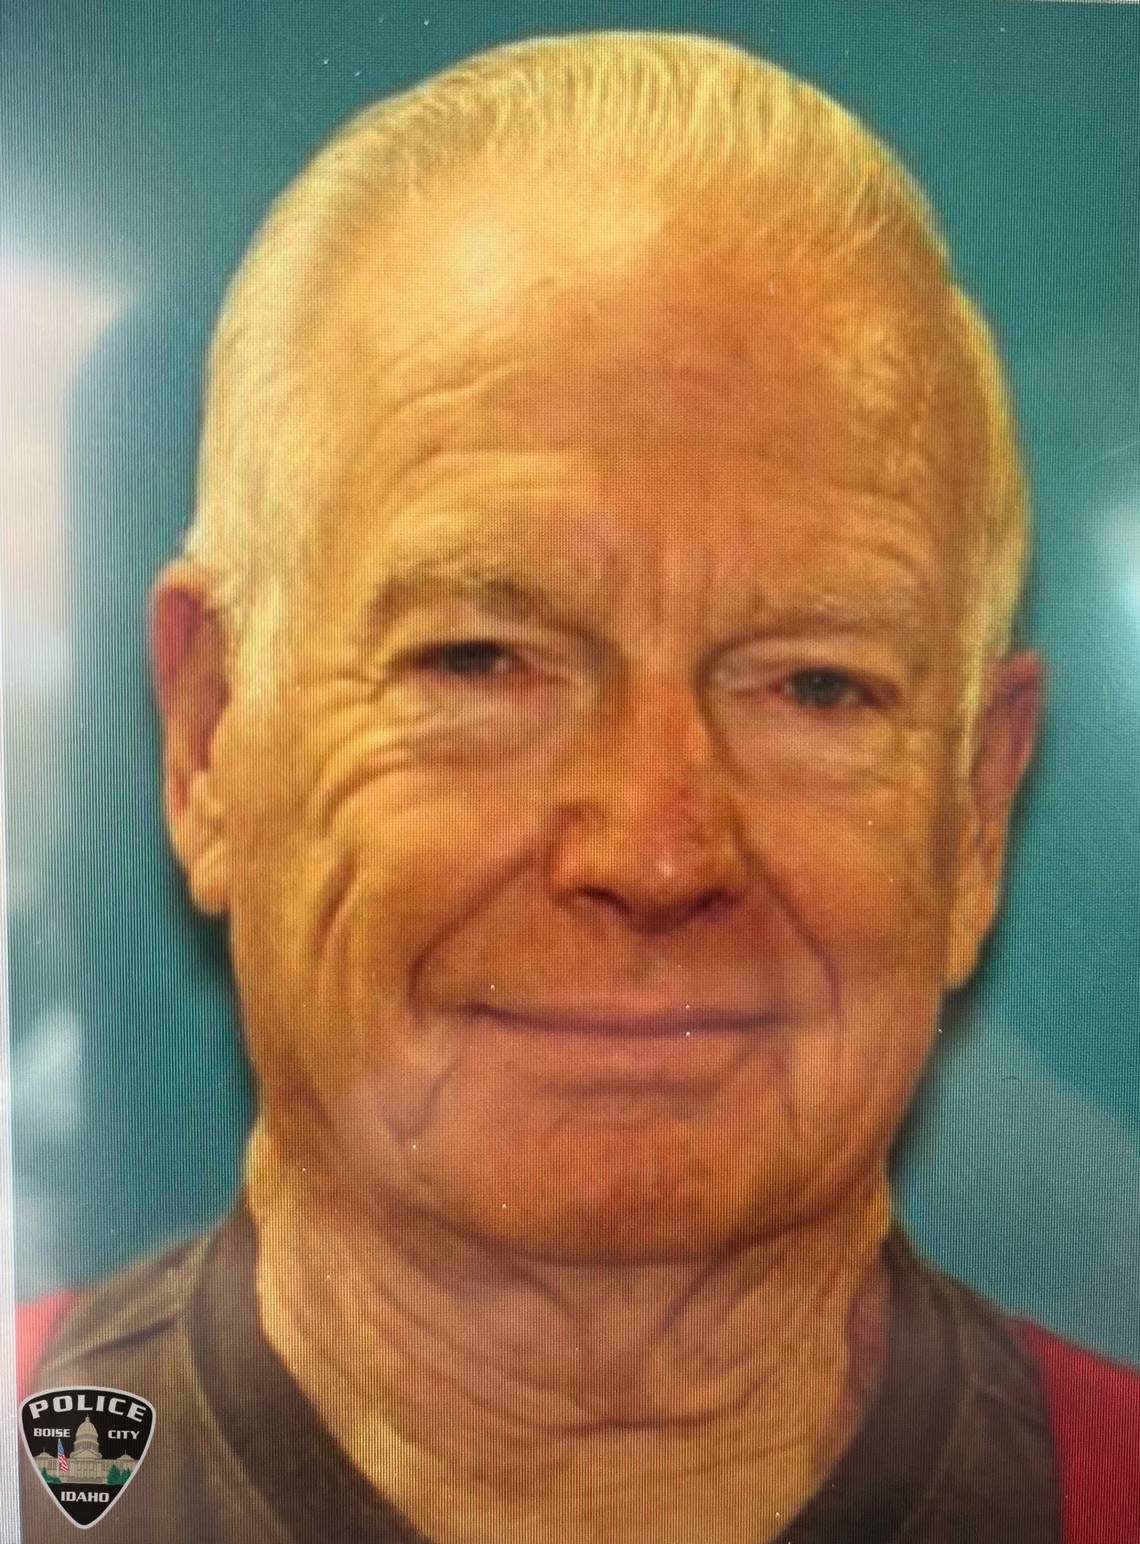 Boise Police are looking for an 82-year-old man named Marvin who went missing near McMillan and Five Mile Roads on Saturday. Boise Police Department